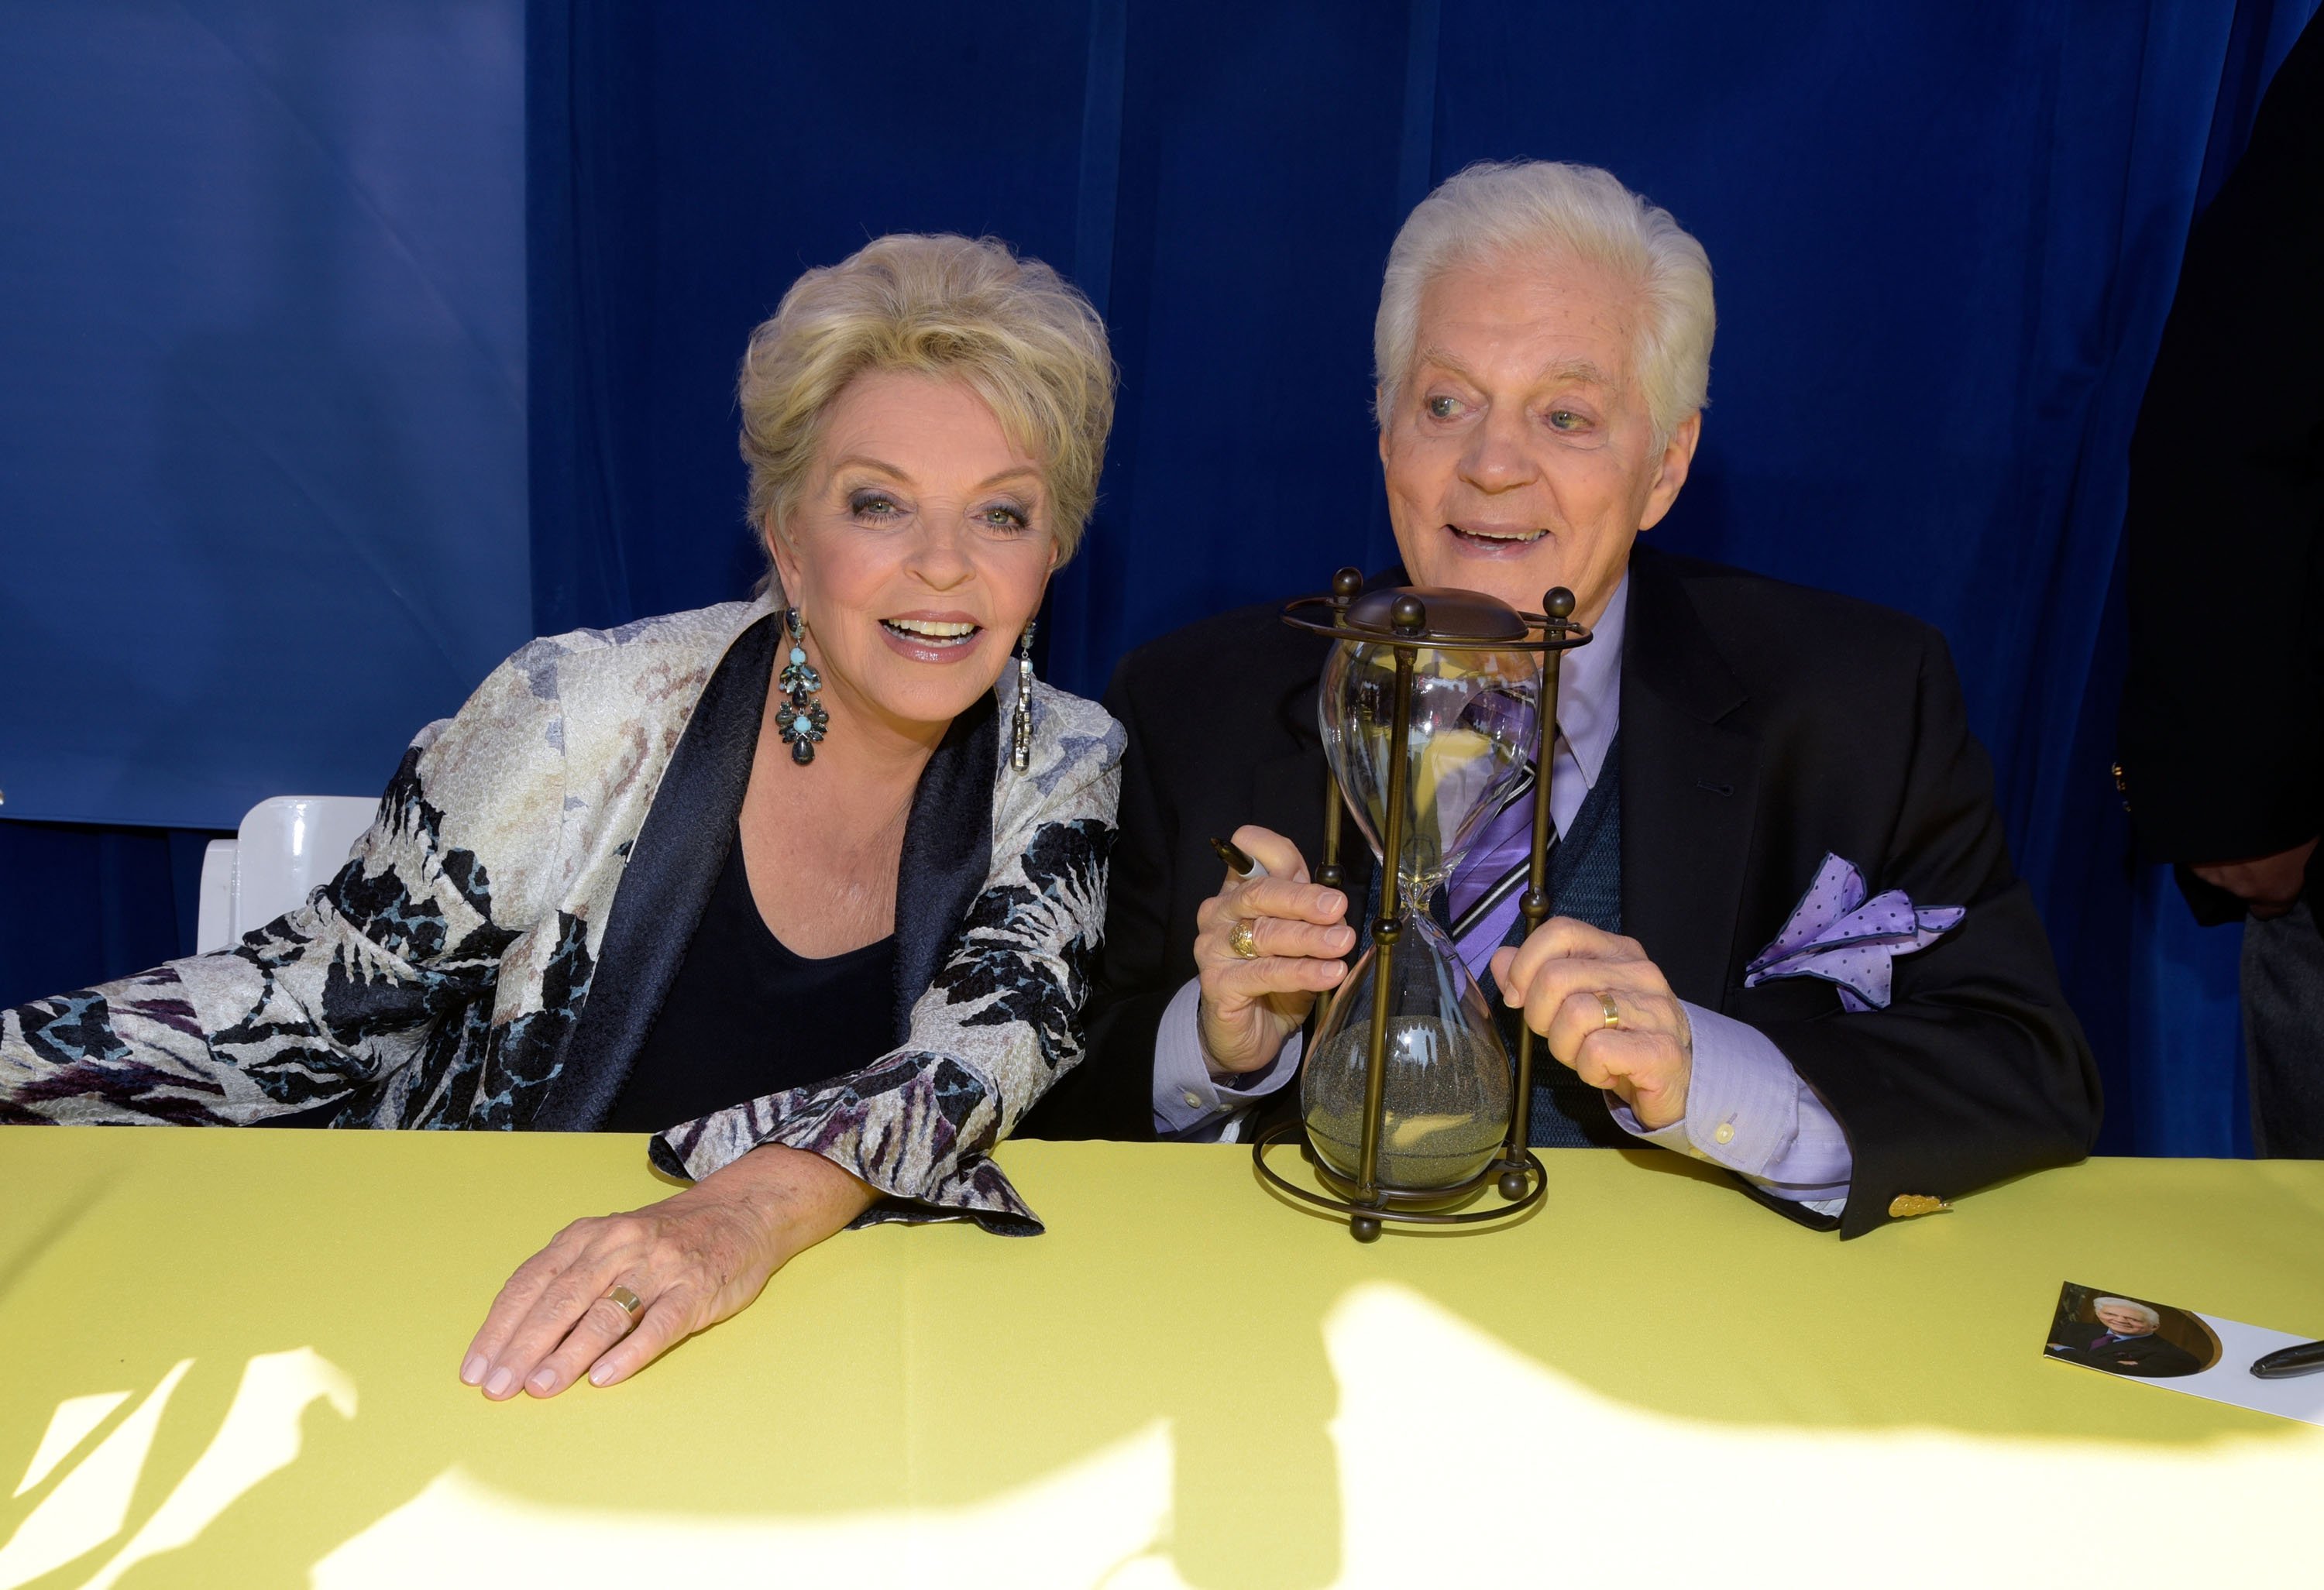 After 56 Years ‘Days of Our Lives’ Airs Final Episode on NBC Network